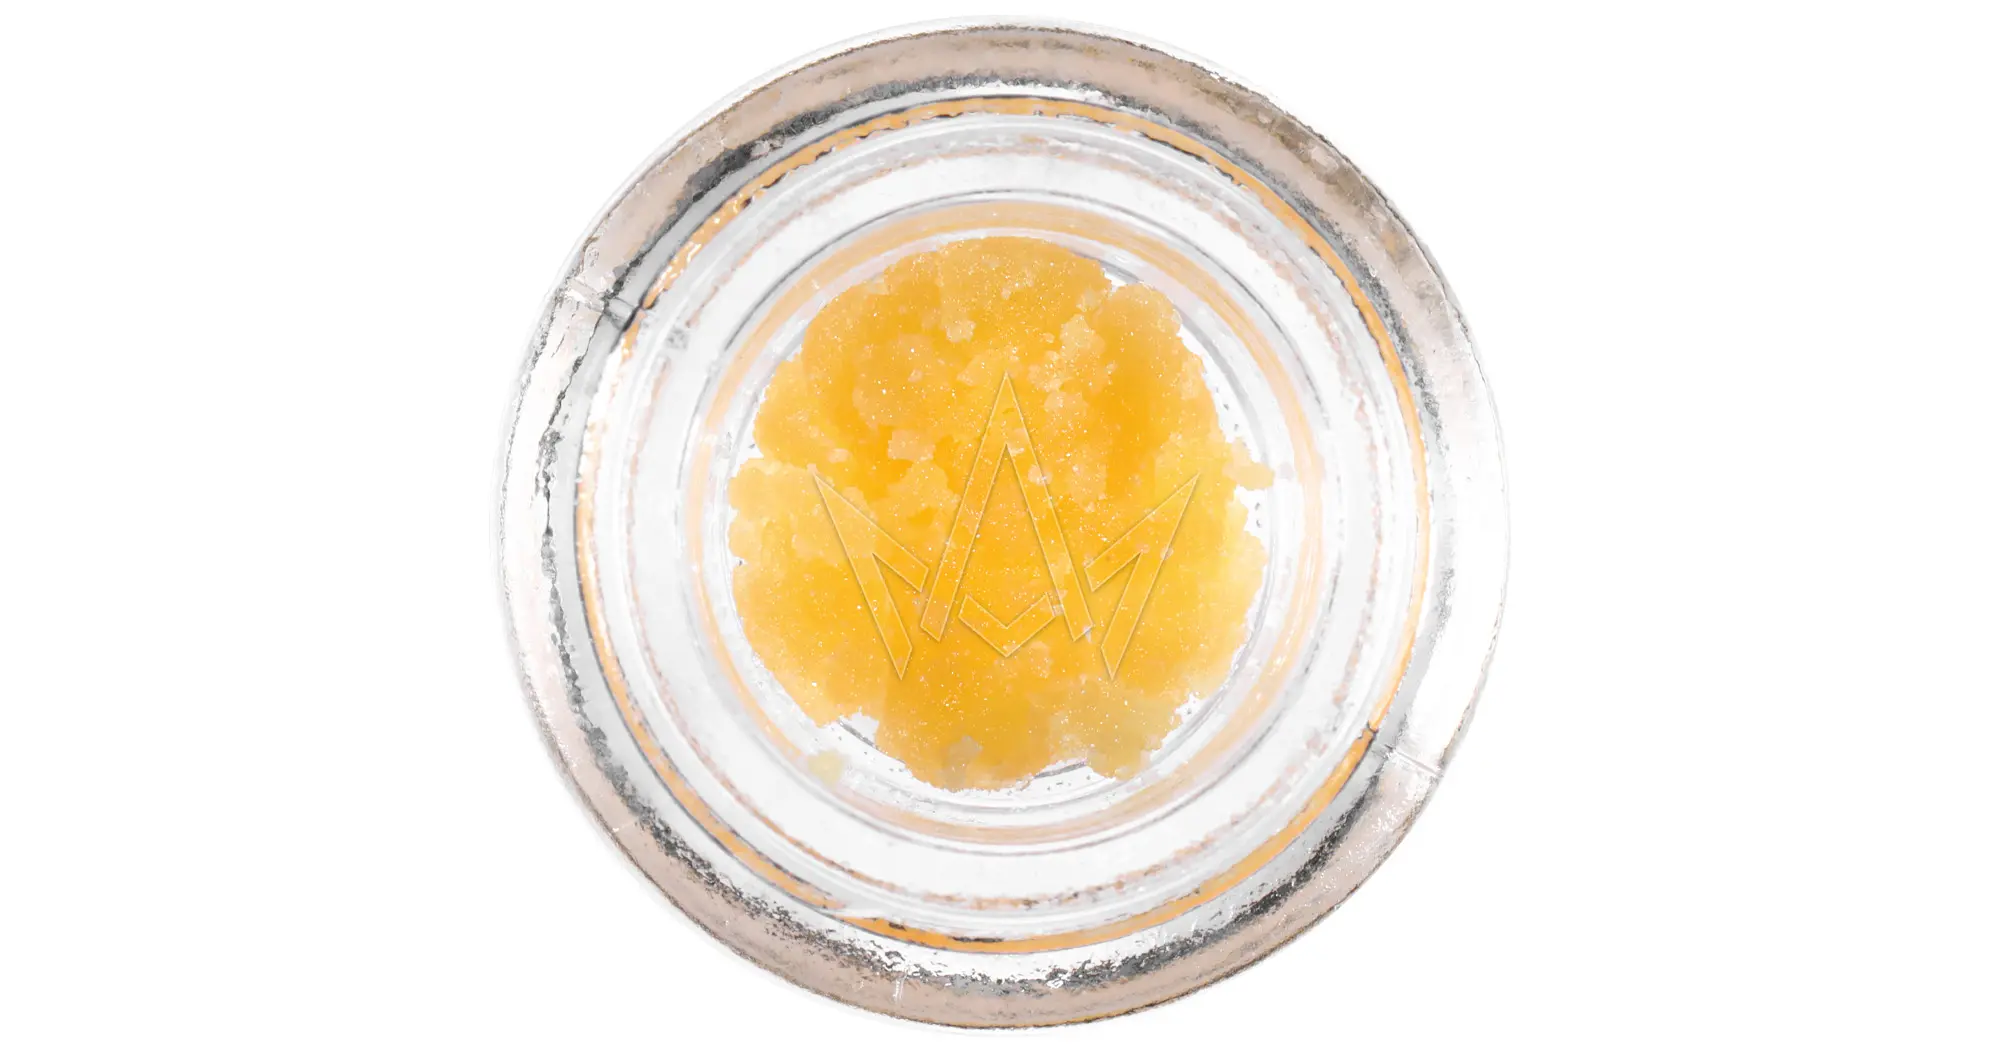 Whiteout Live Resin Terp Sugar